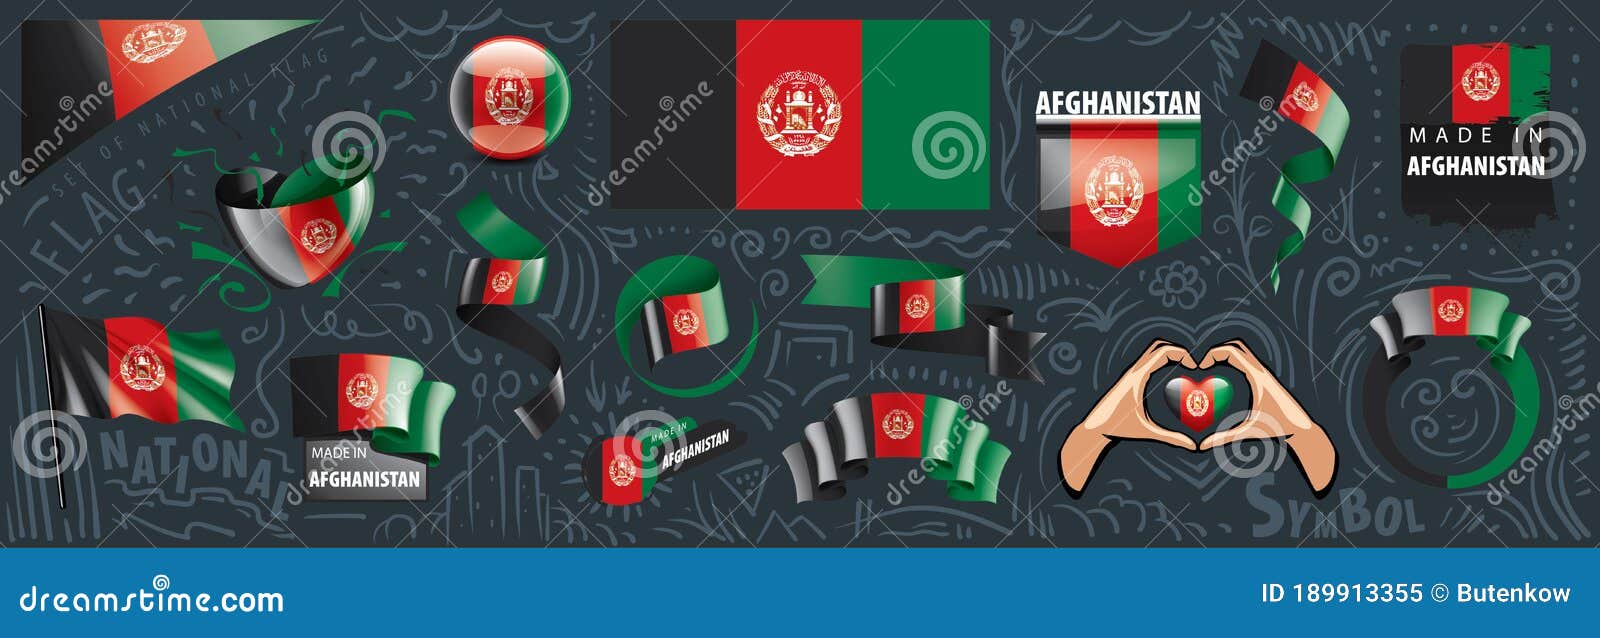 Vector Set of the National Flag of Afghanistan in Various Creative ...